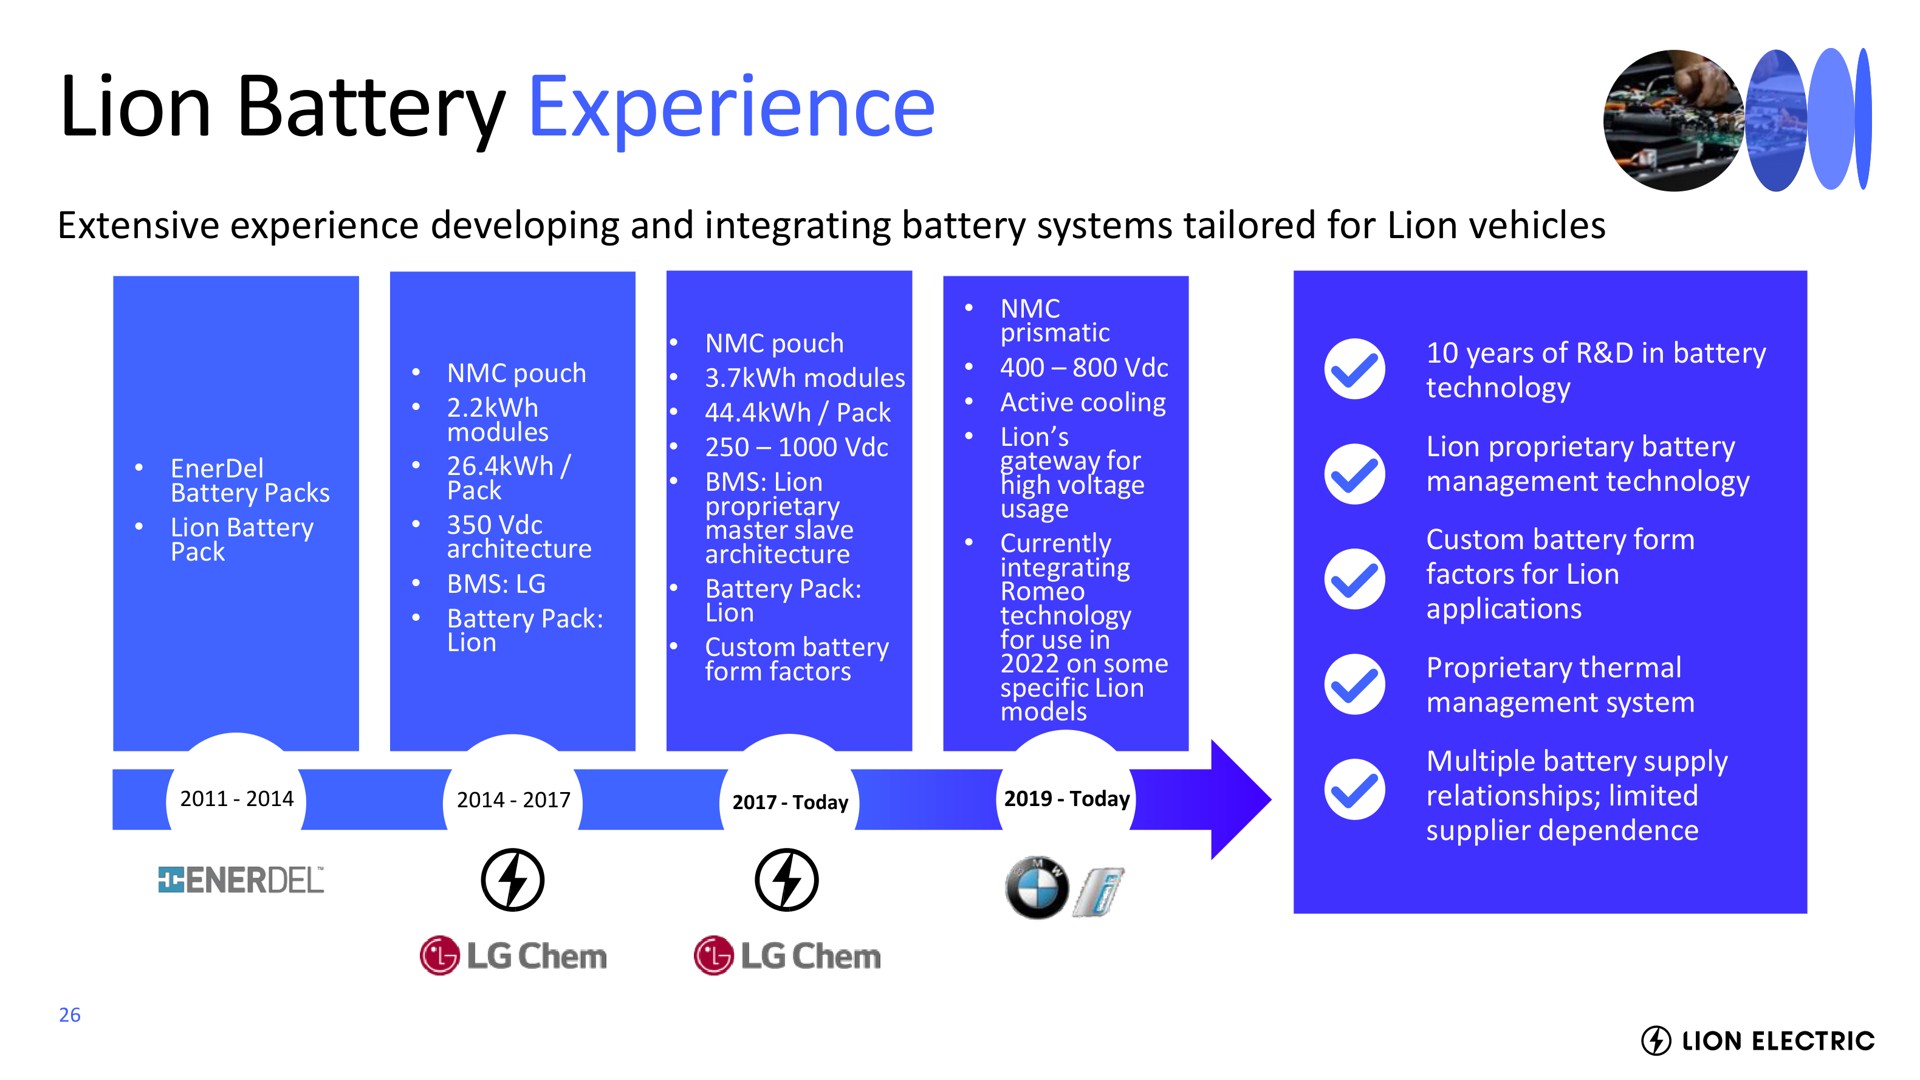 lion battery experience | Lion Electric